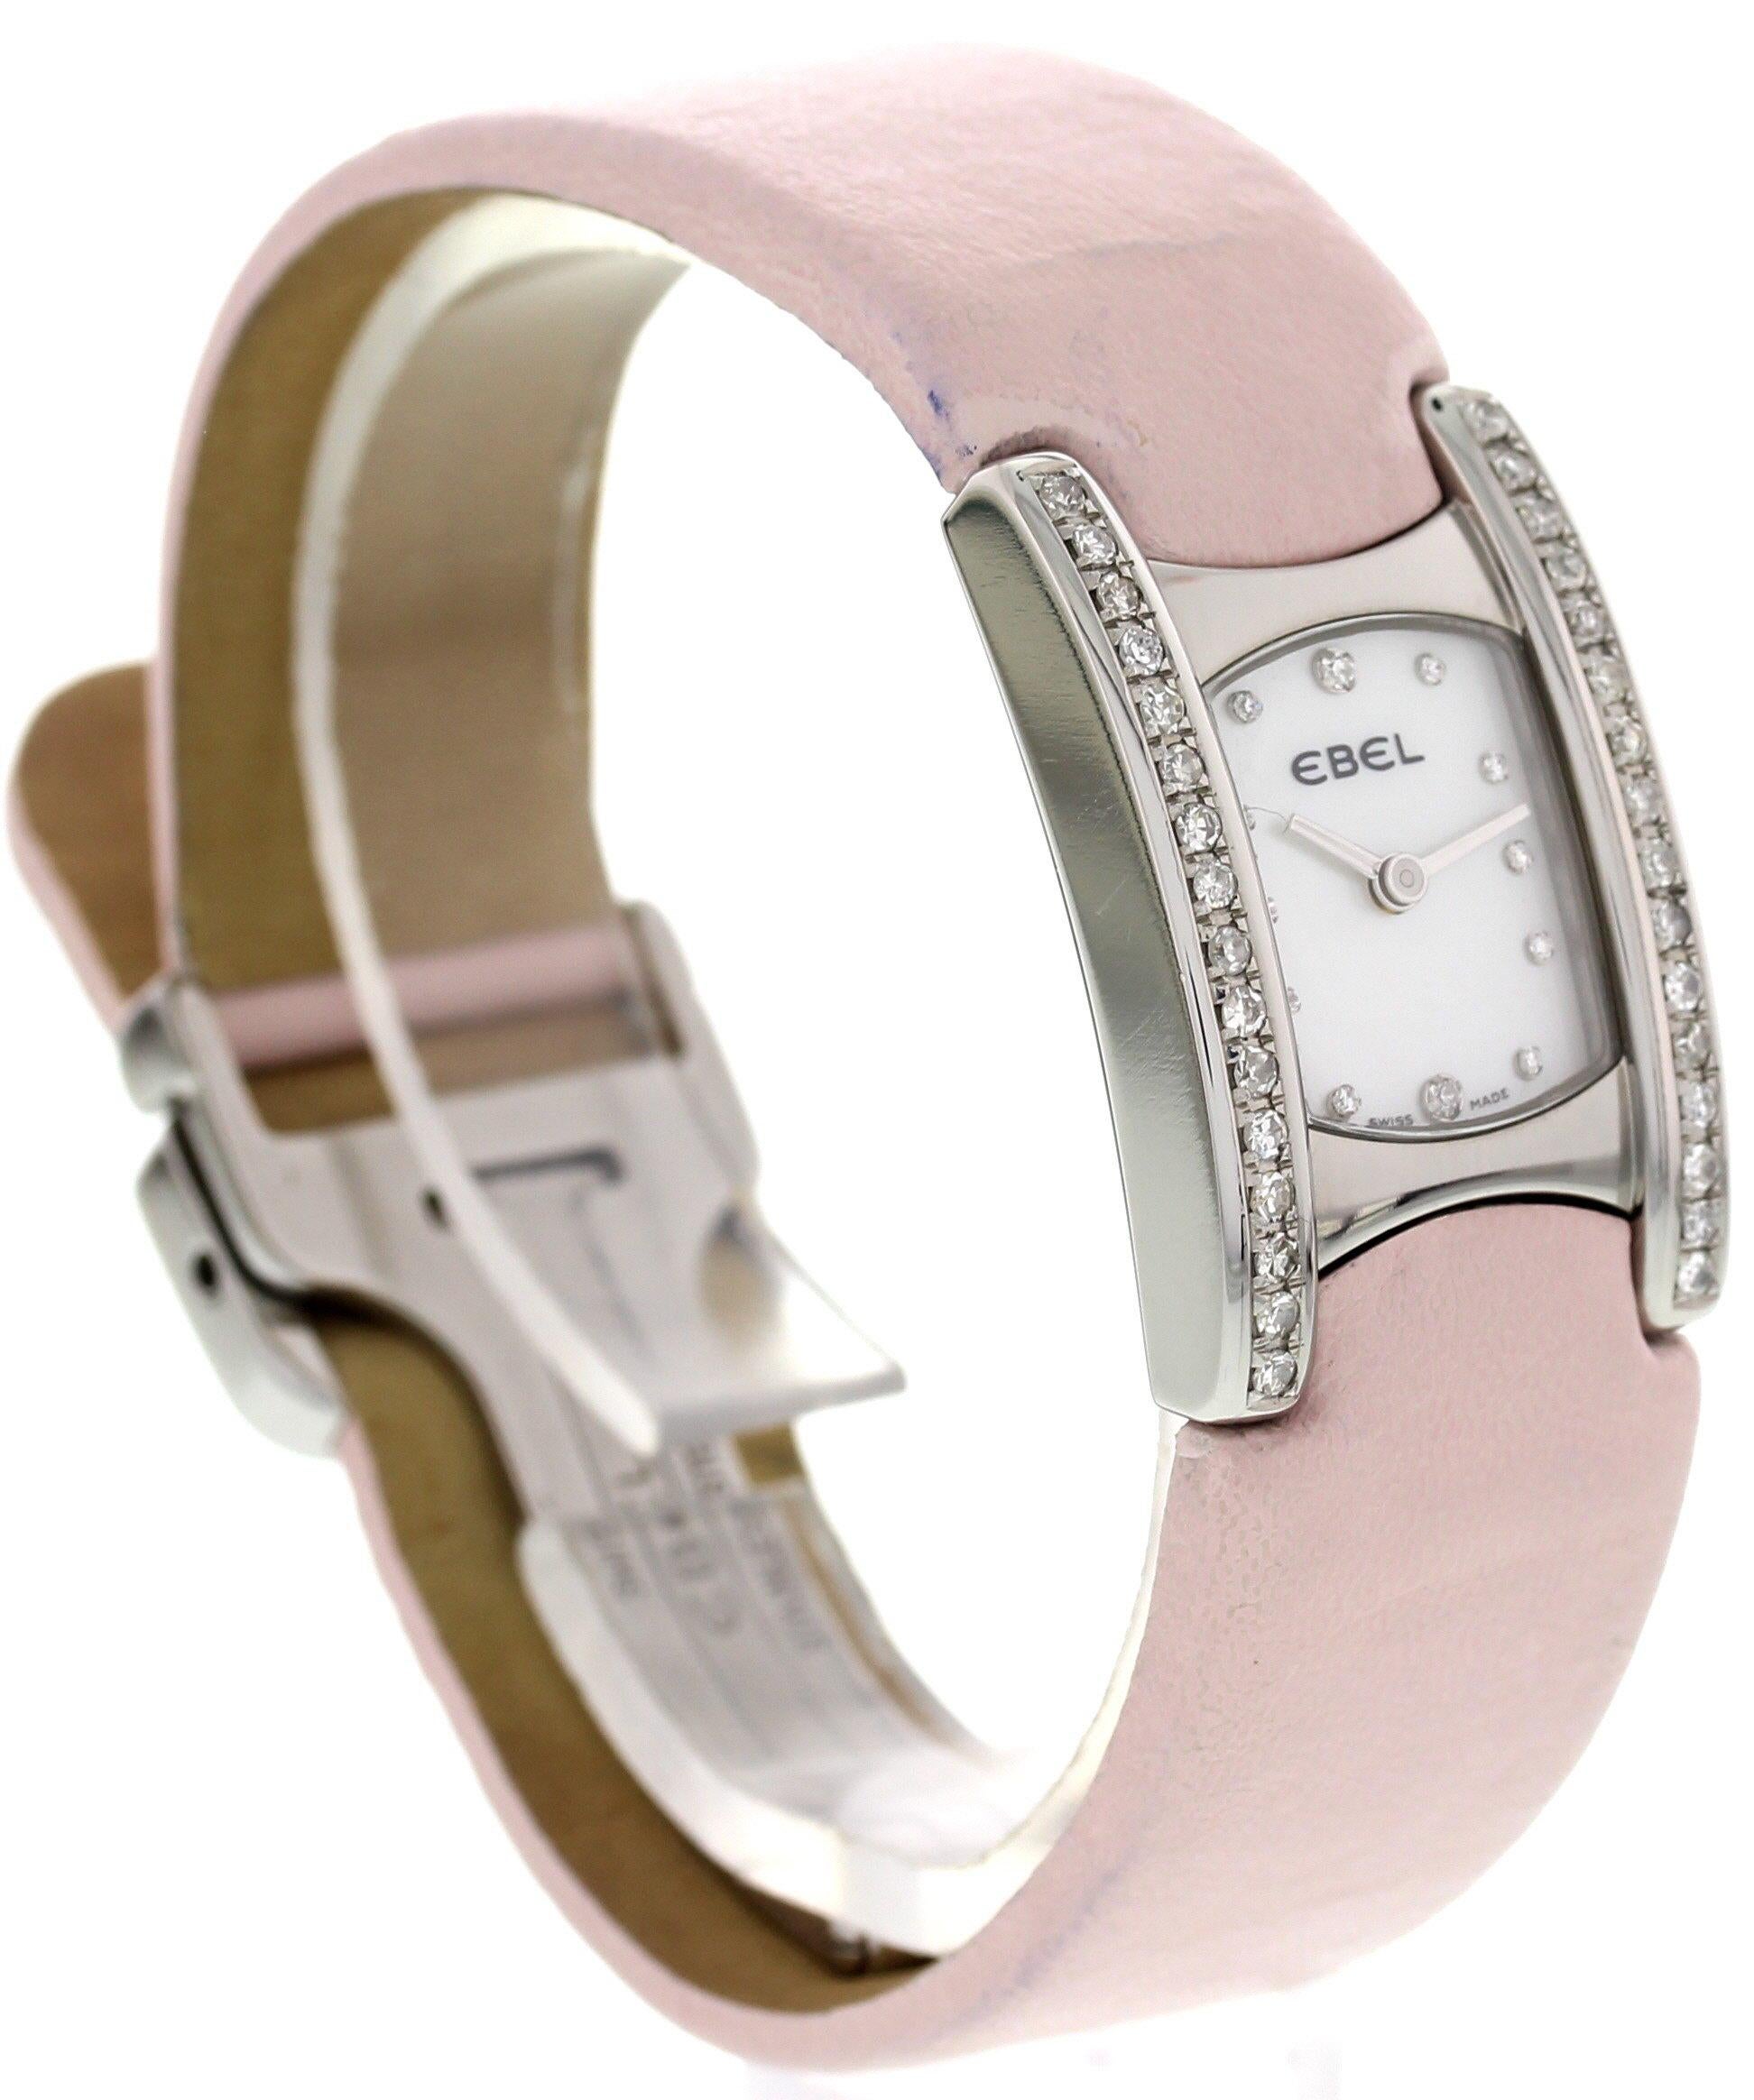 Ebel Beluga Ladies Watch. Stainless steel 19mm case with diamonds. Mother of pearl dial with diamonds. Pink leather strap with a stainless steel deployment buckle. Quartz battery movement.
